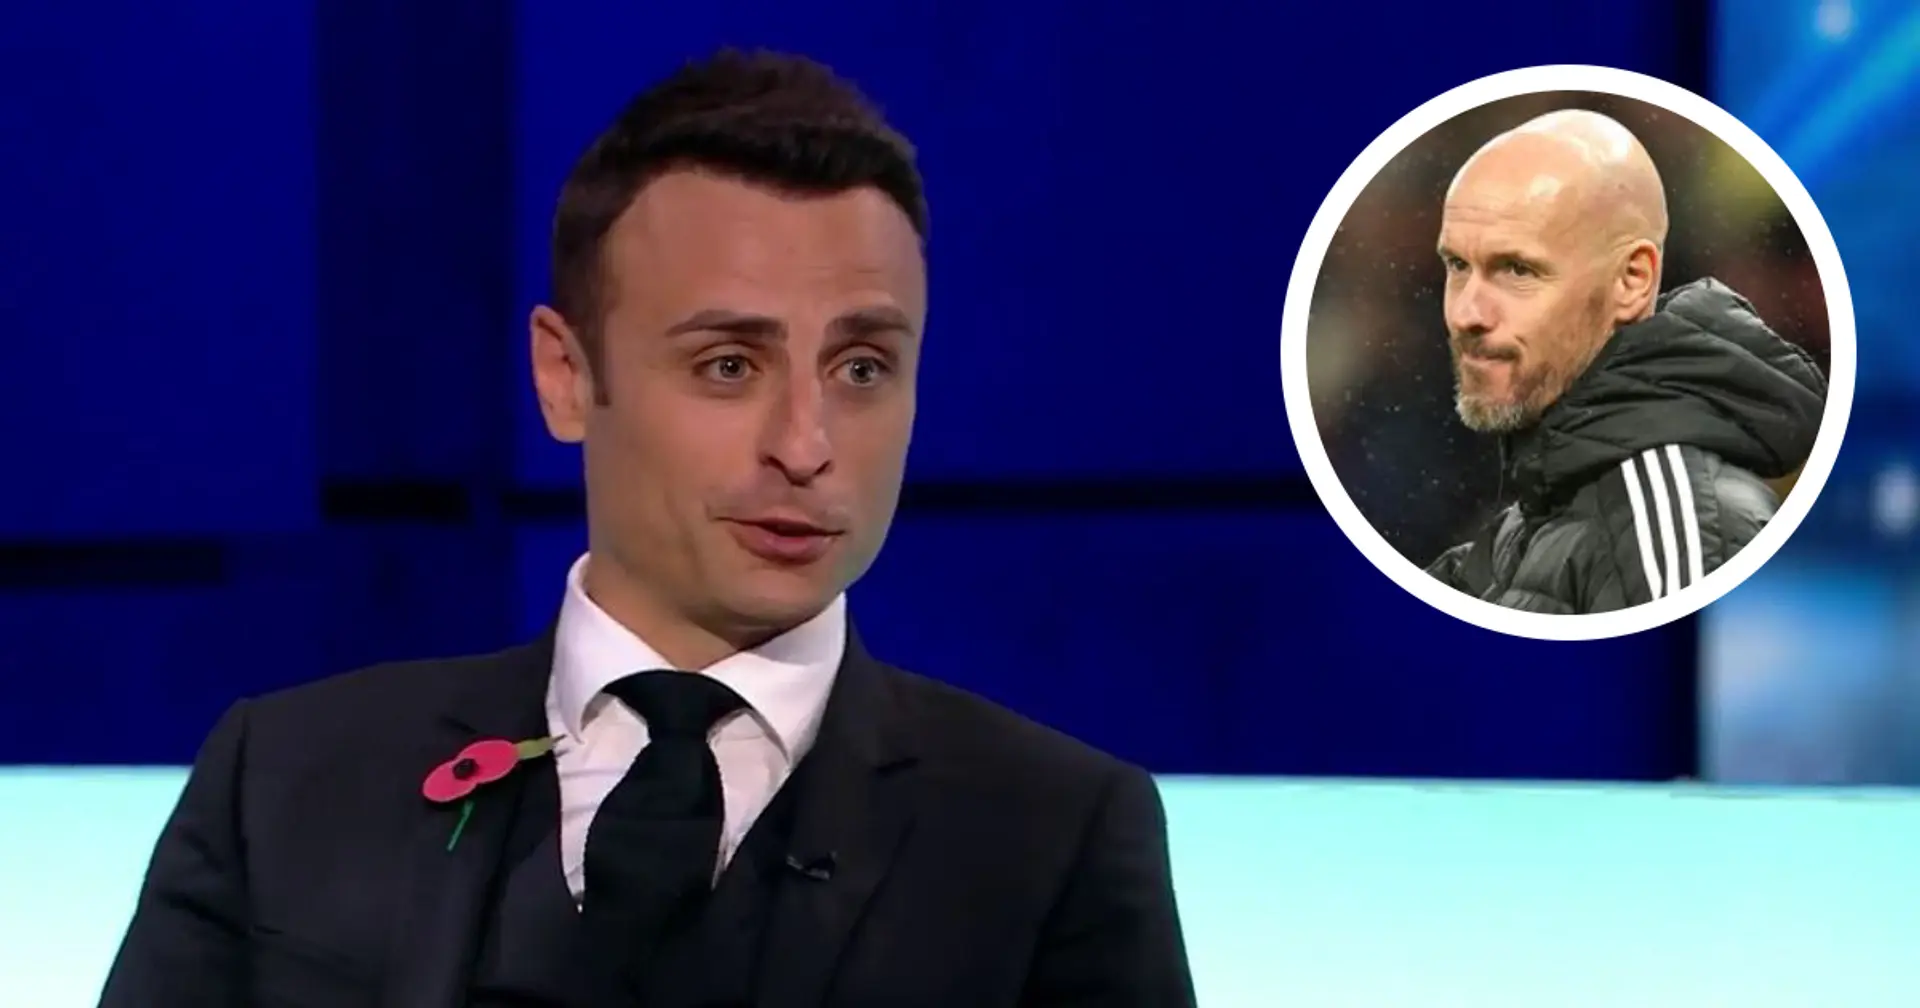 'They are a proper team and look like one': Dimitar Berbatov in awe of Erik ten Hag's work at Old Trafford